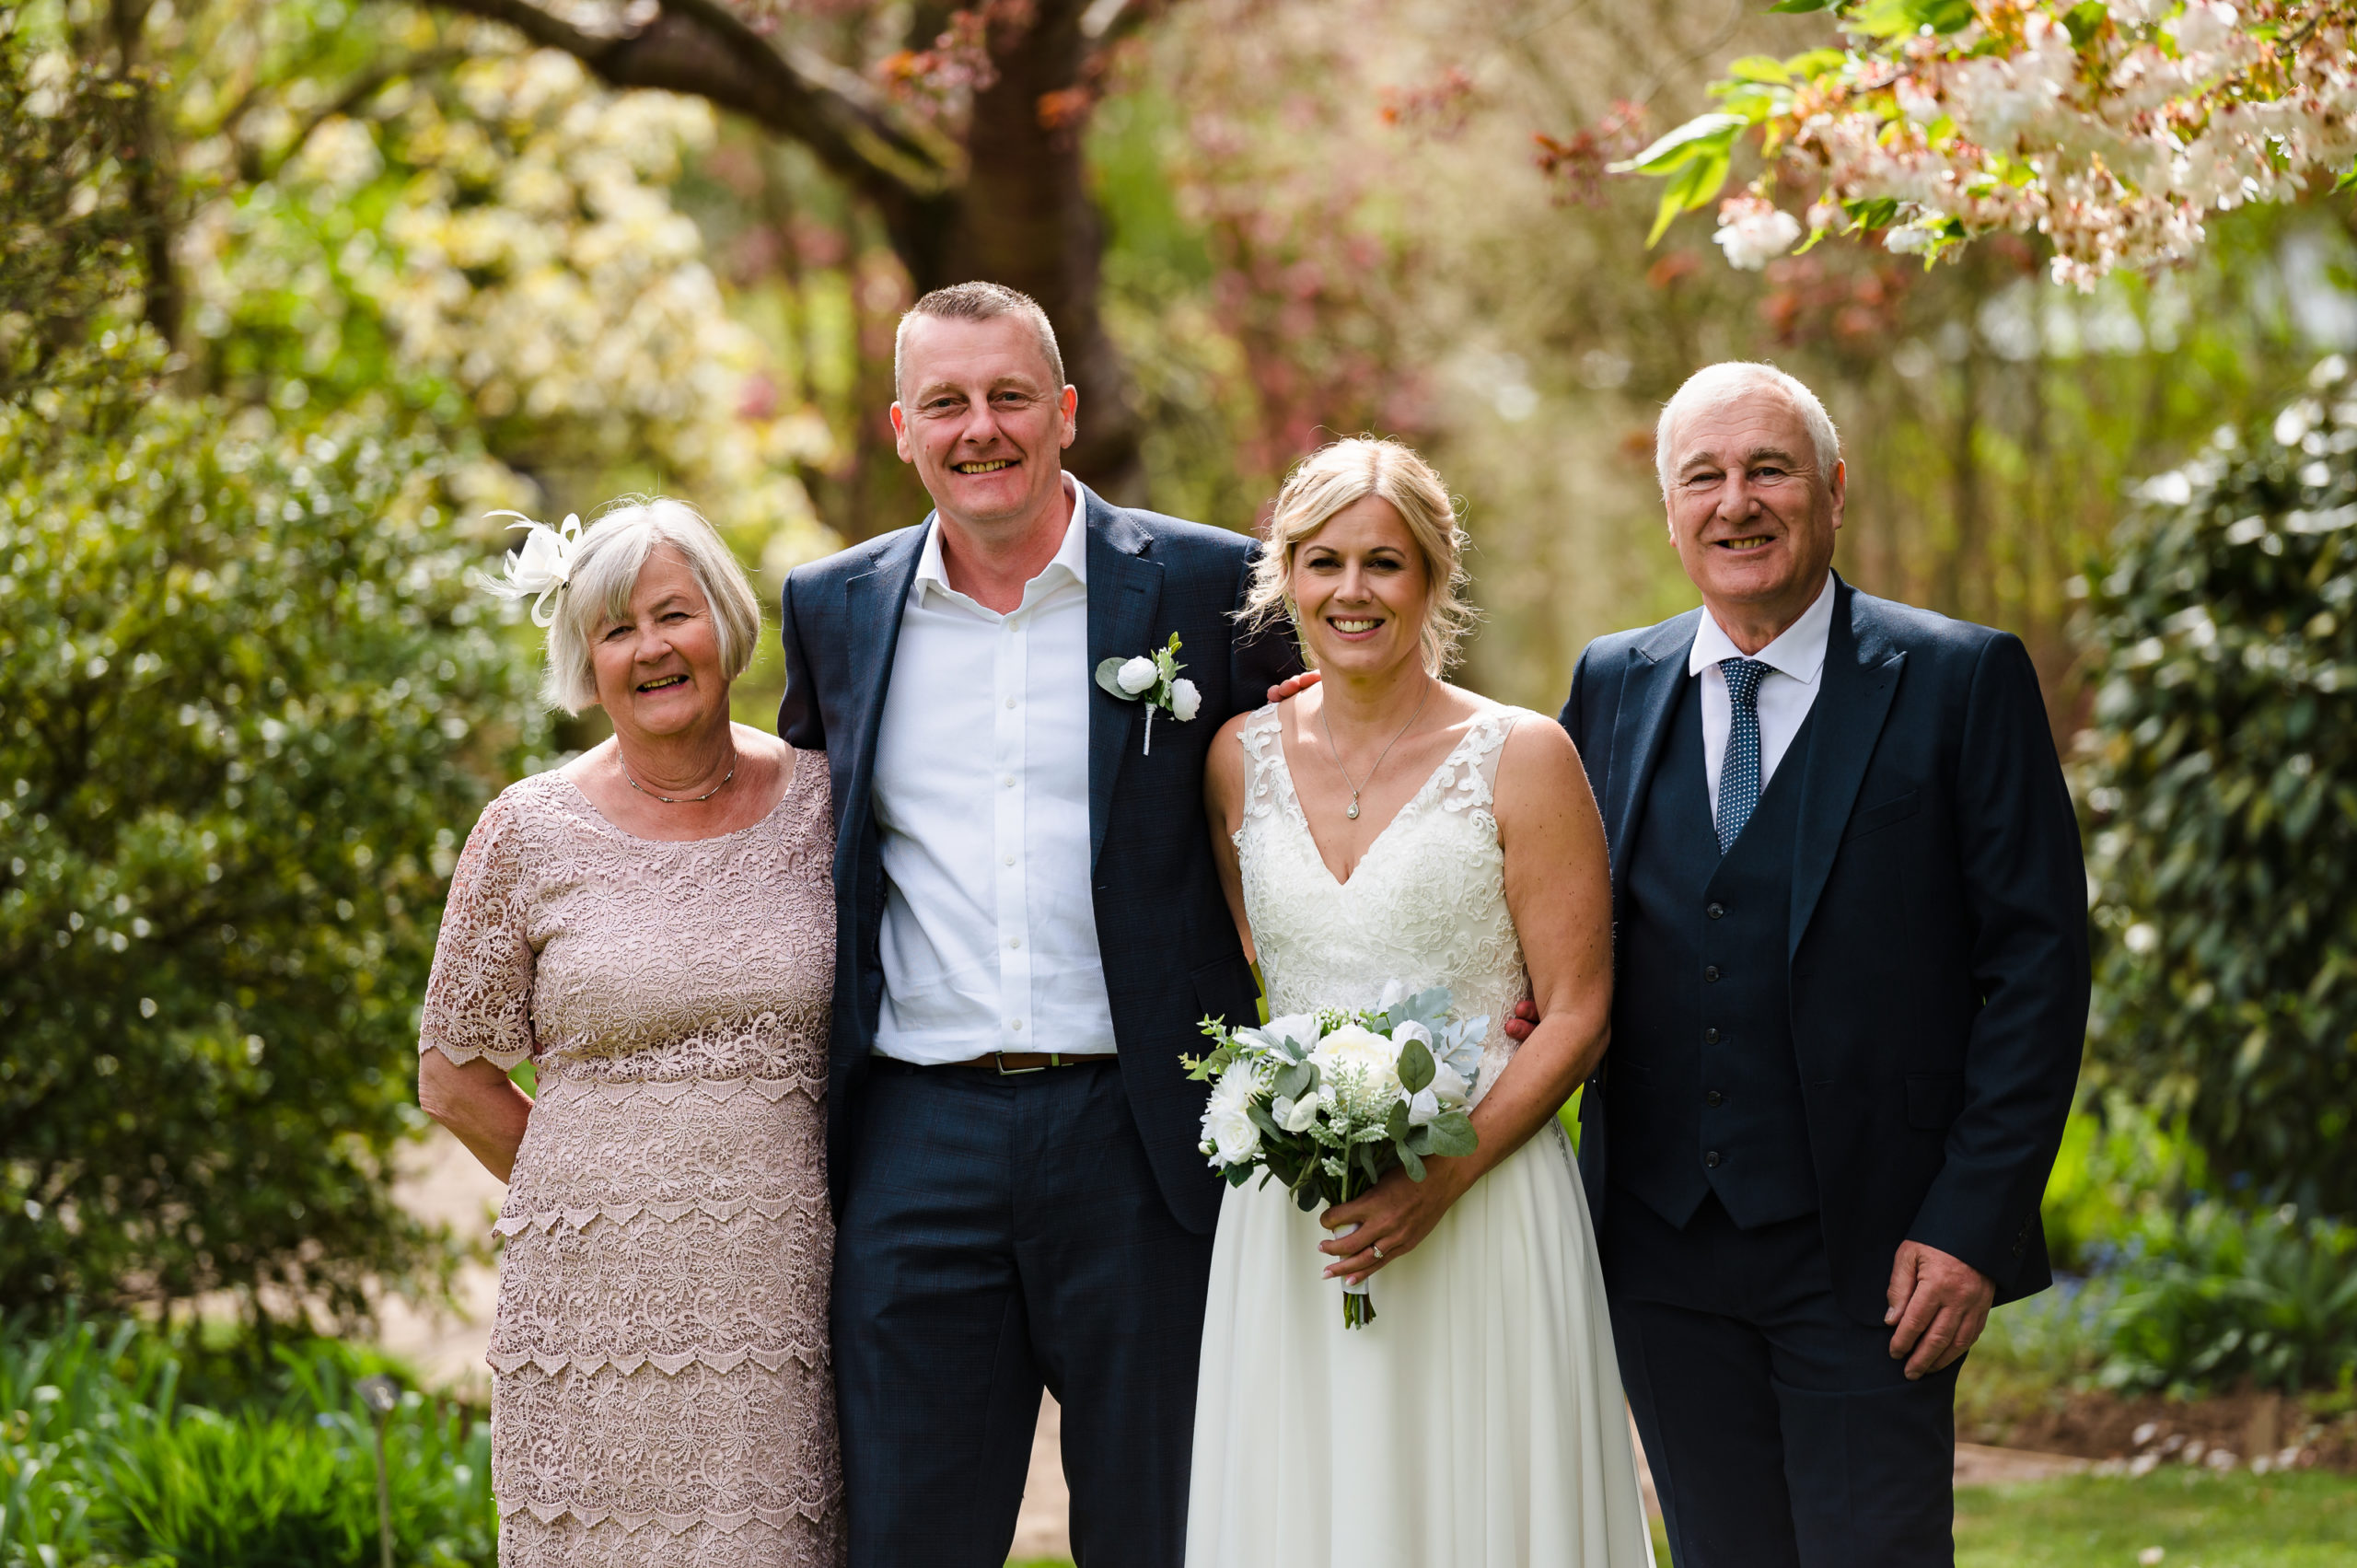 Family wedding photo at barnsdale gardens